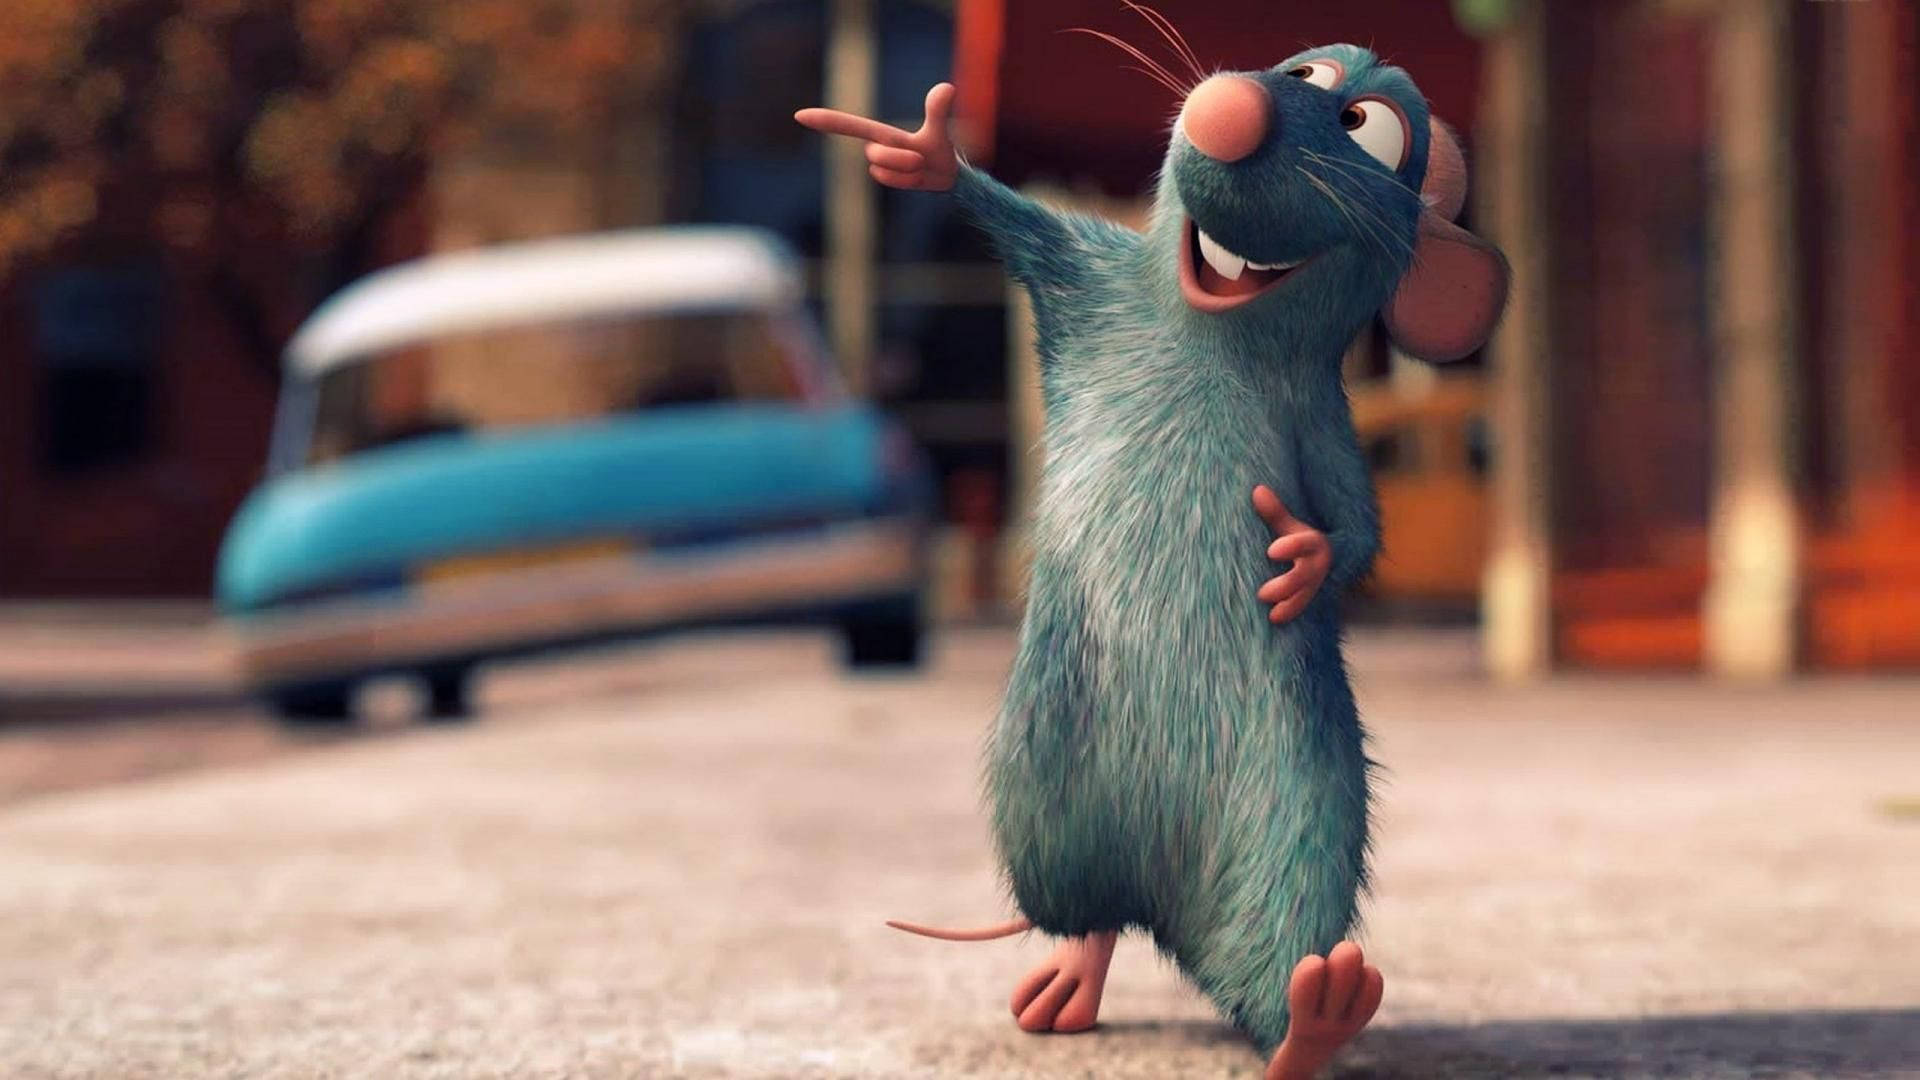 Ratatouille Remy In The Street Wallpaper